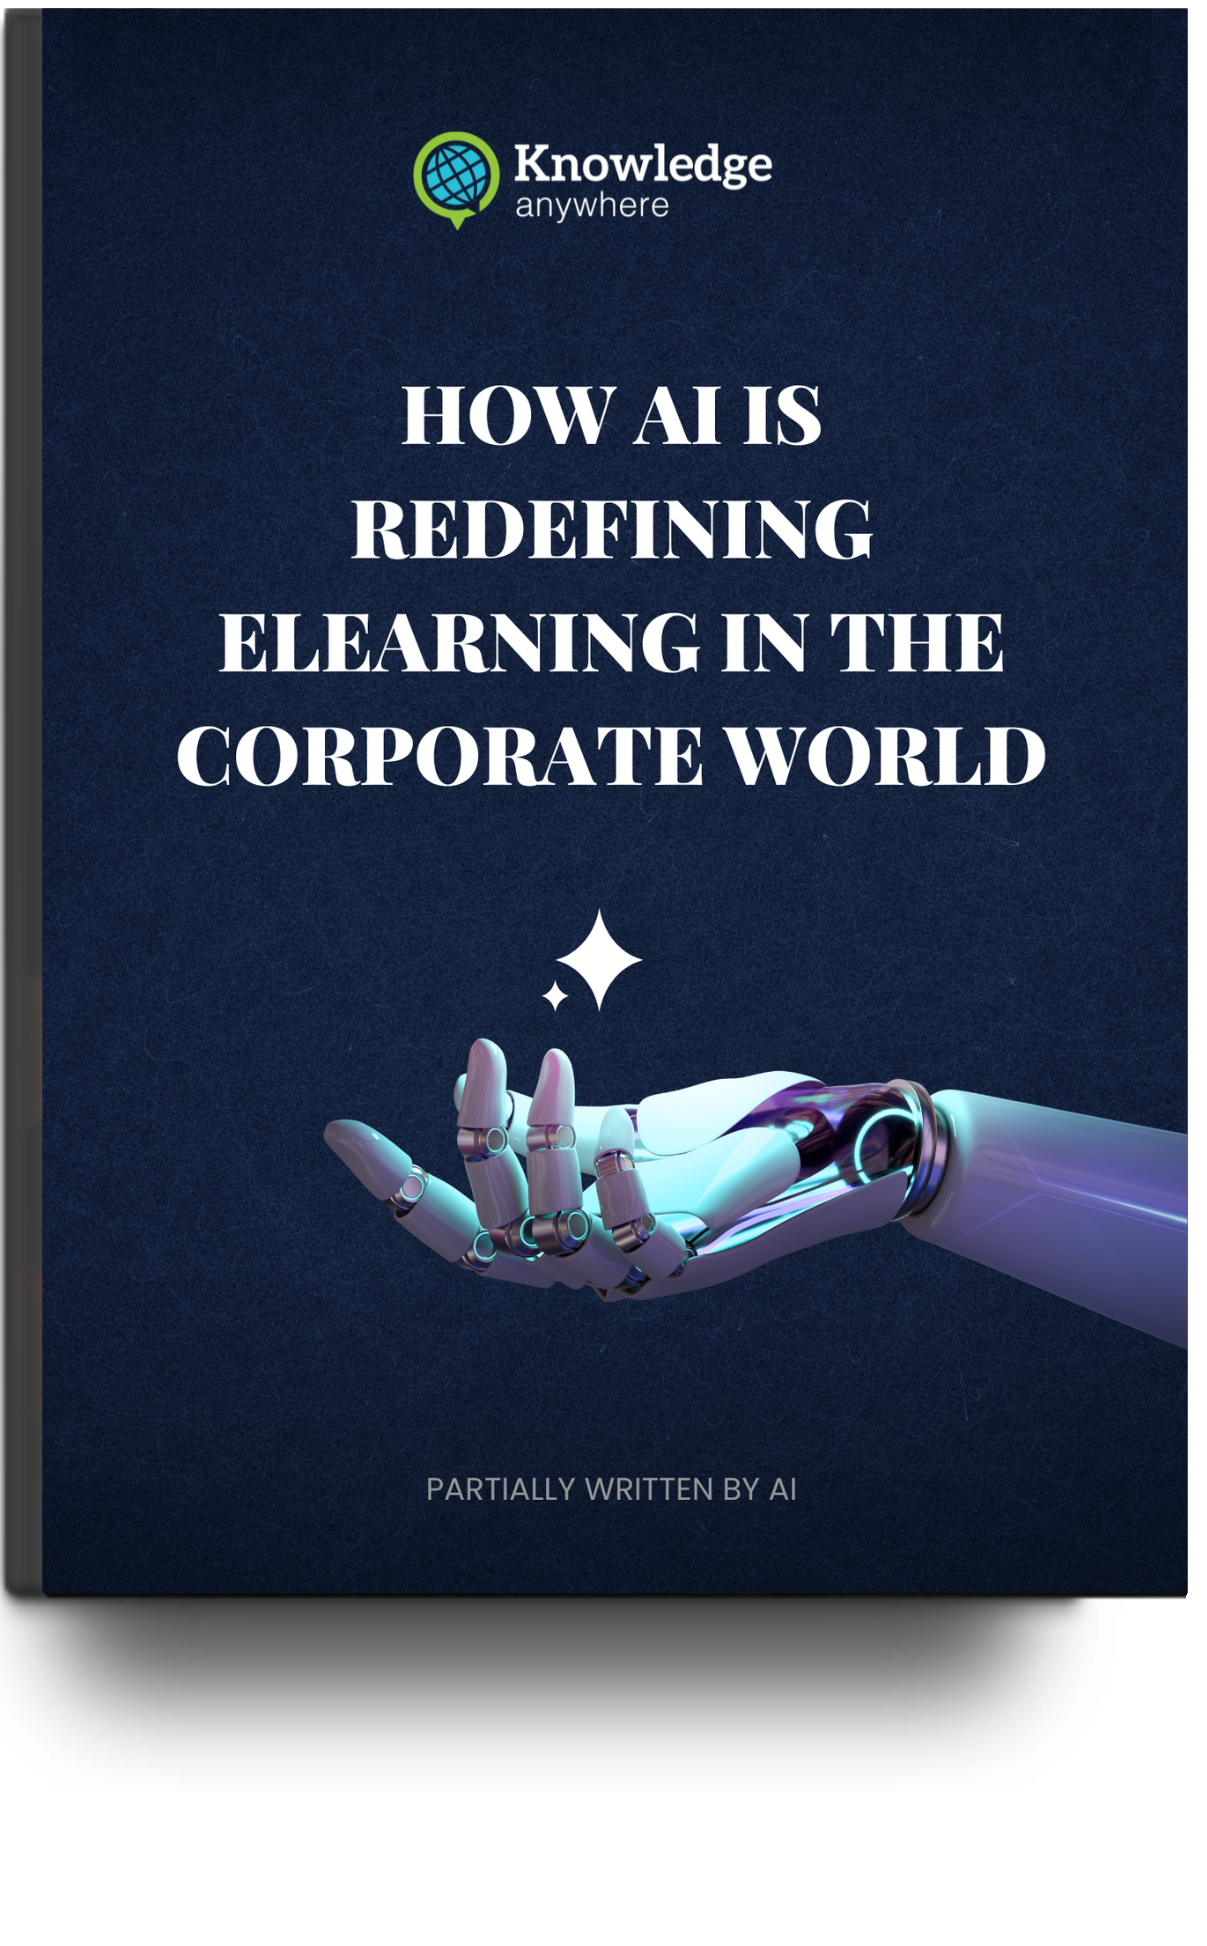 How AI is Redefining eLearning in the Corporate World